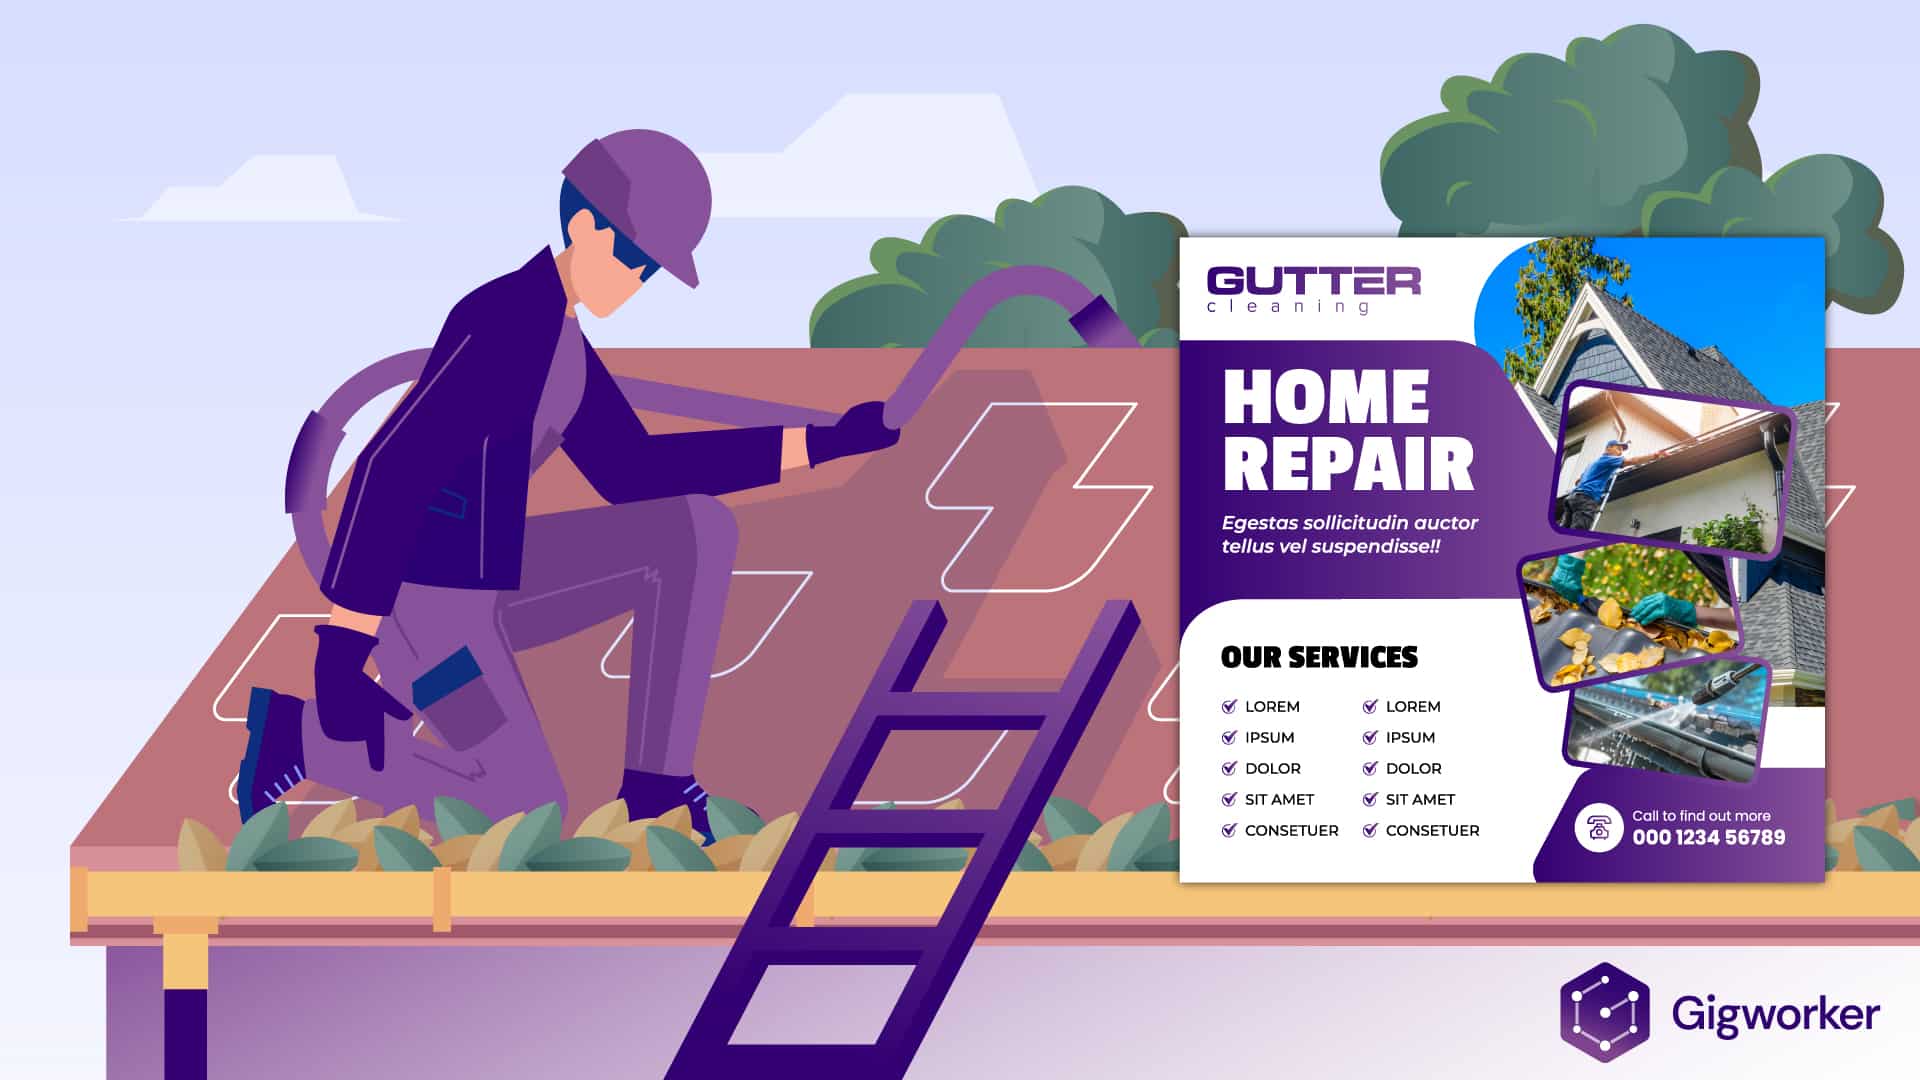 vector graphic showing an illustration of a guy cleaning gutters graphics related to how to start a gutter cleaning business